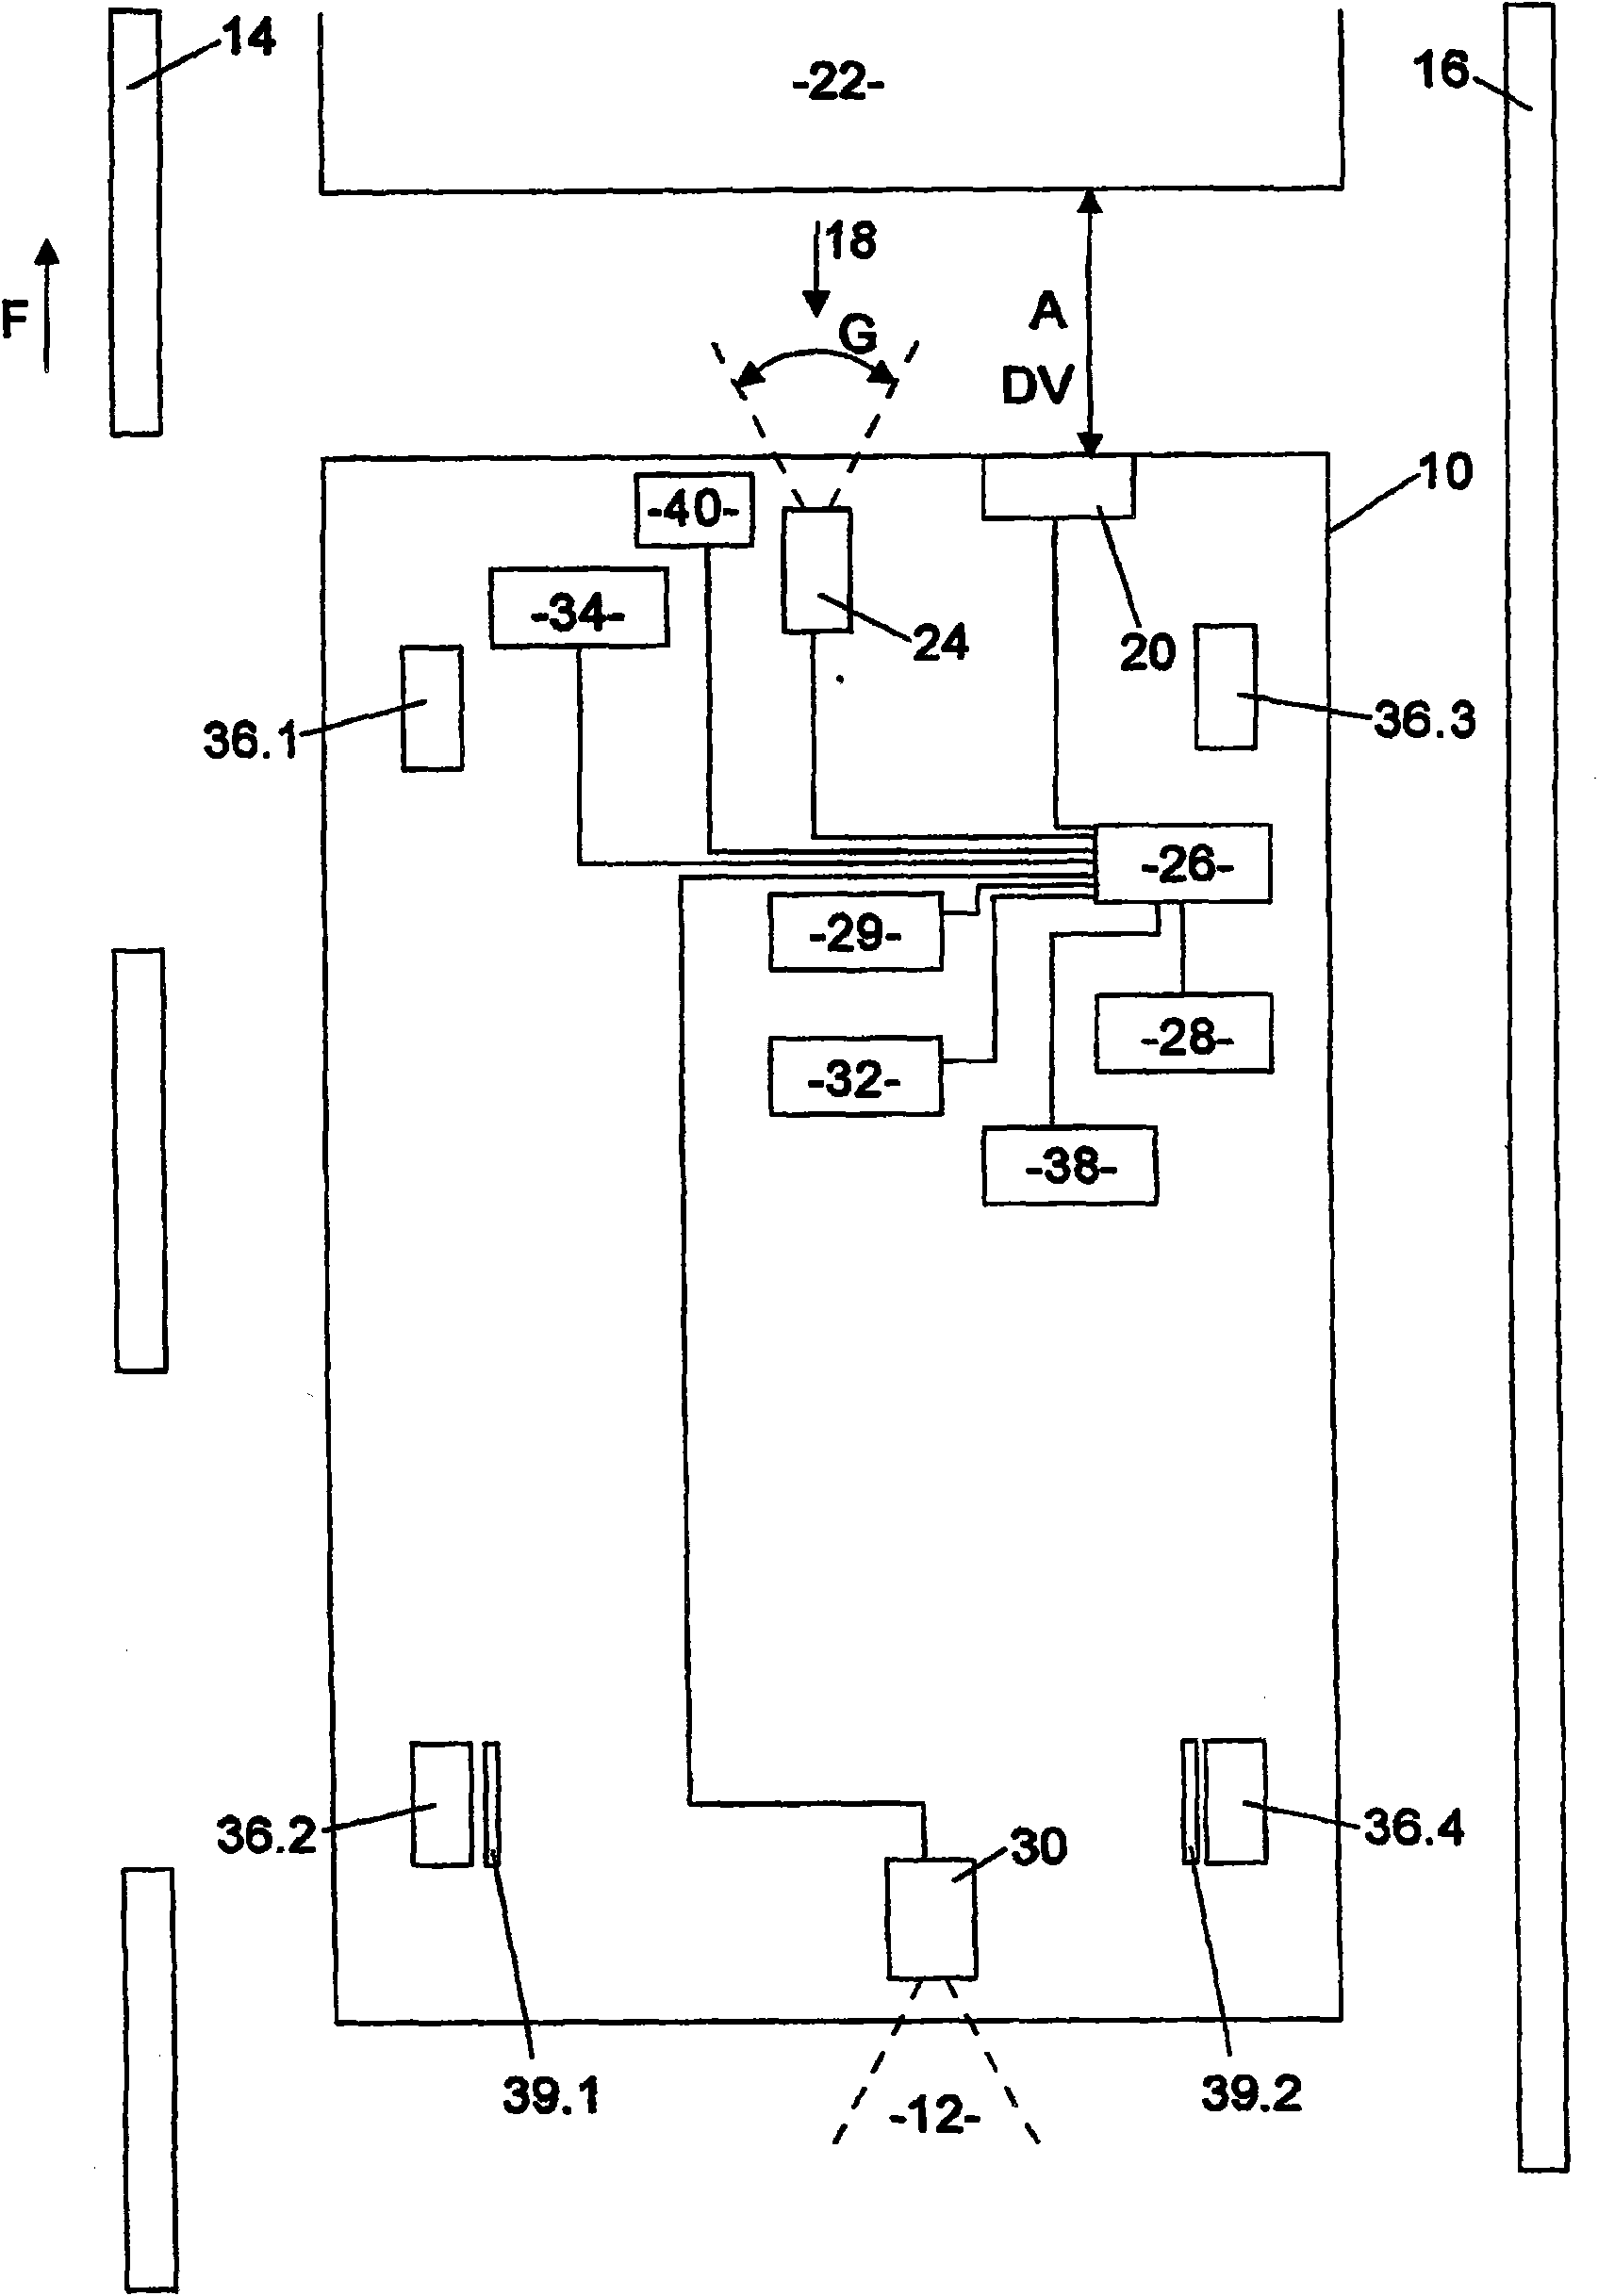 Driver assistance system for a motor vehicle